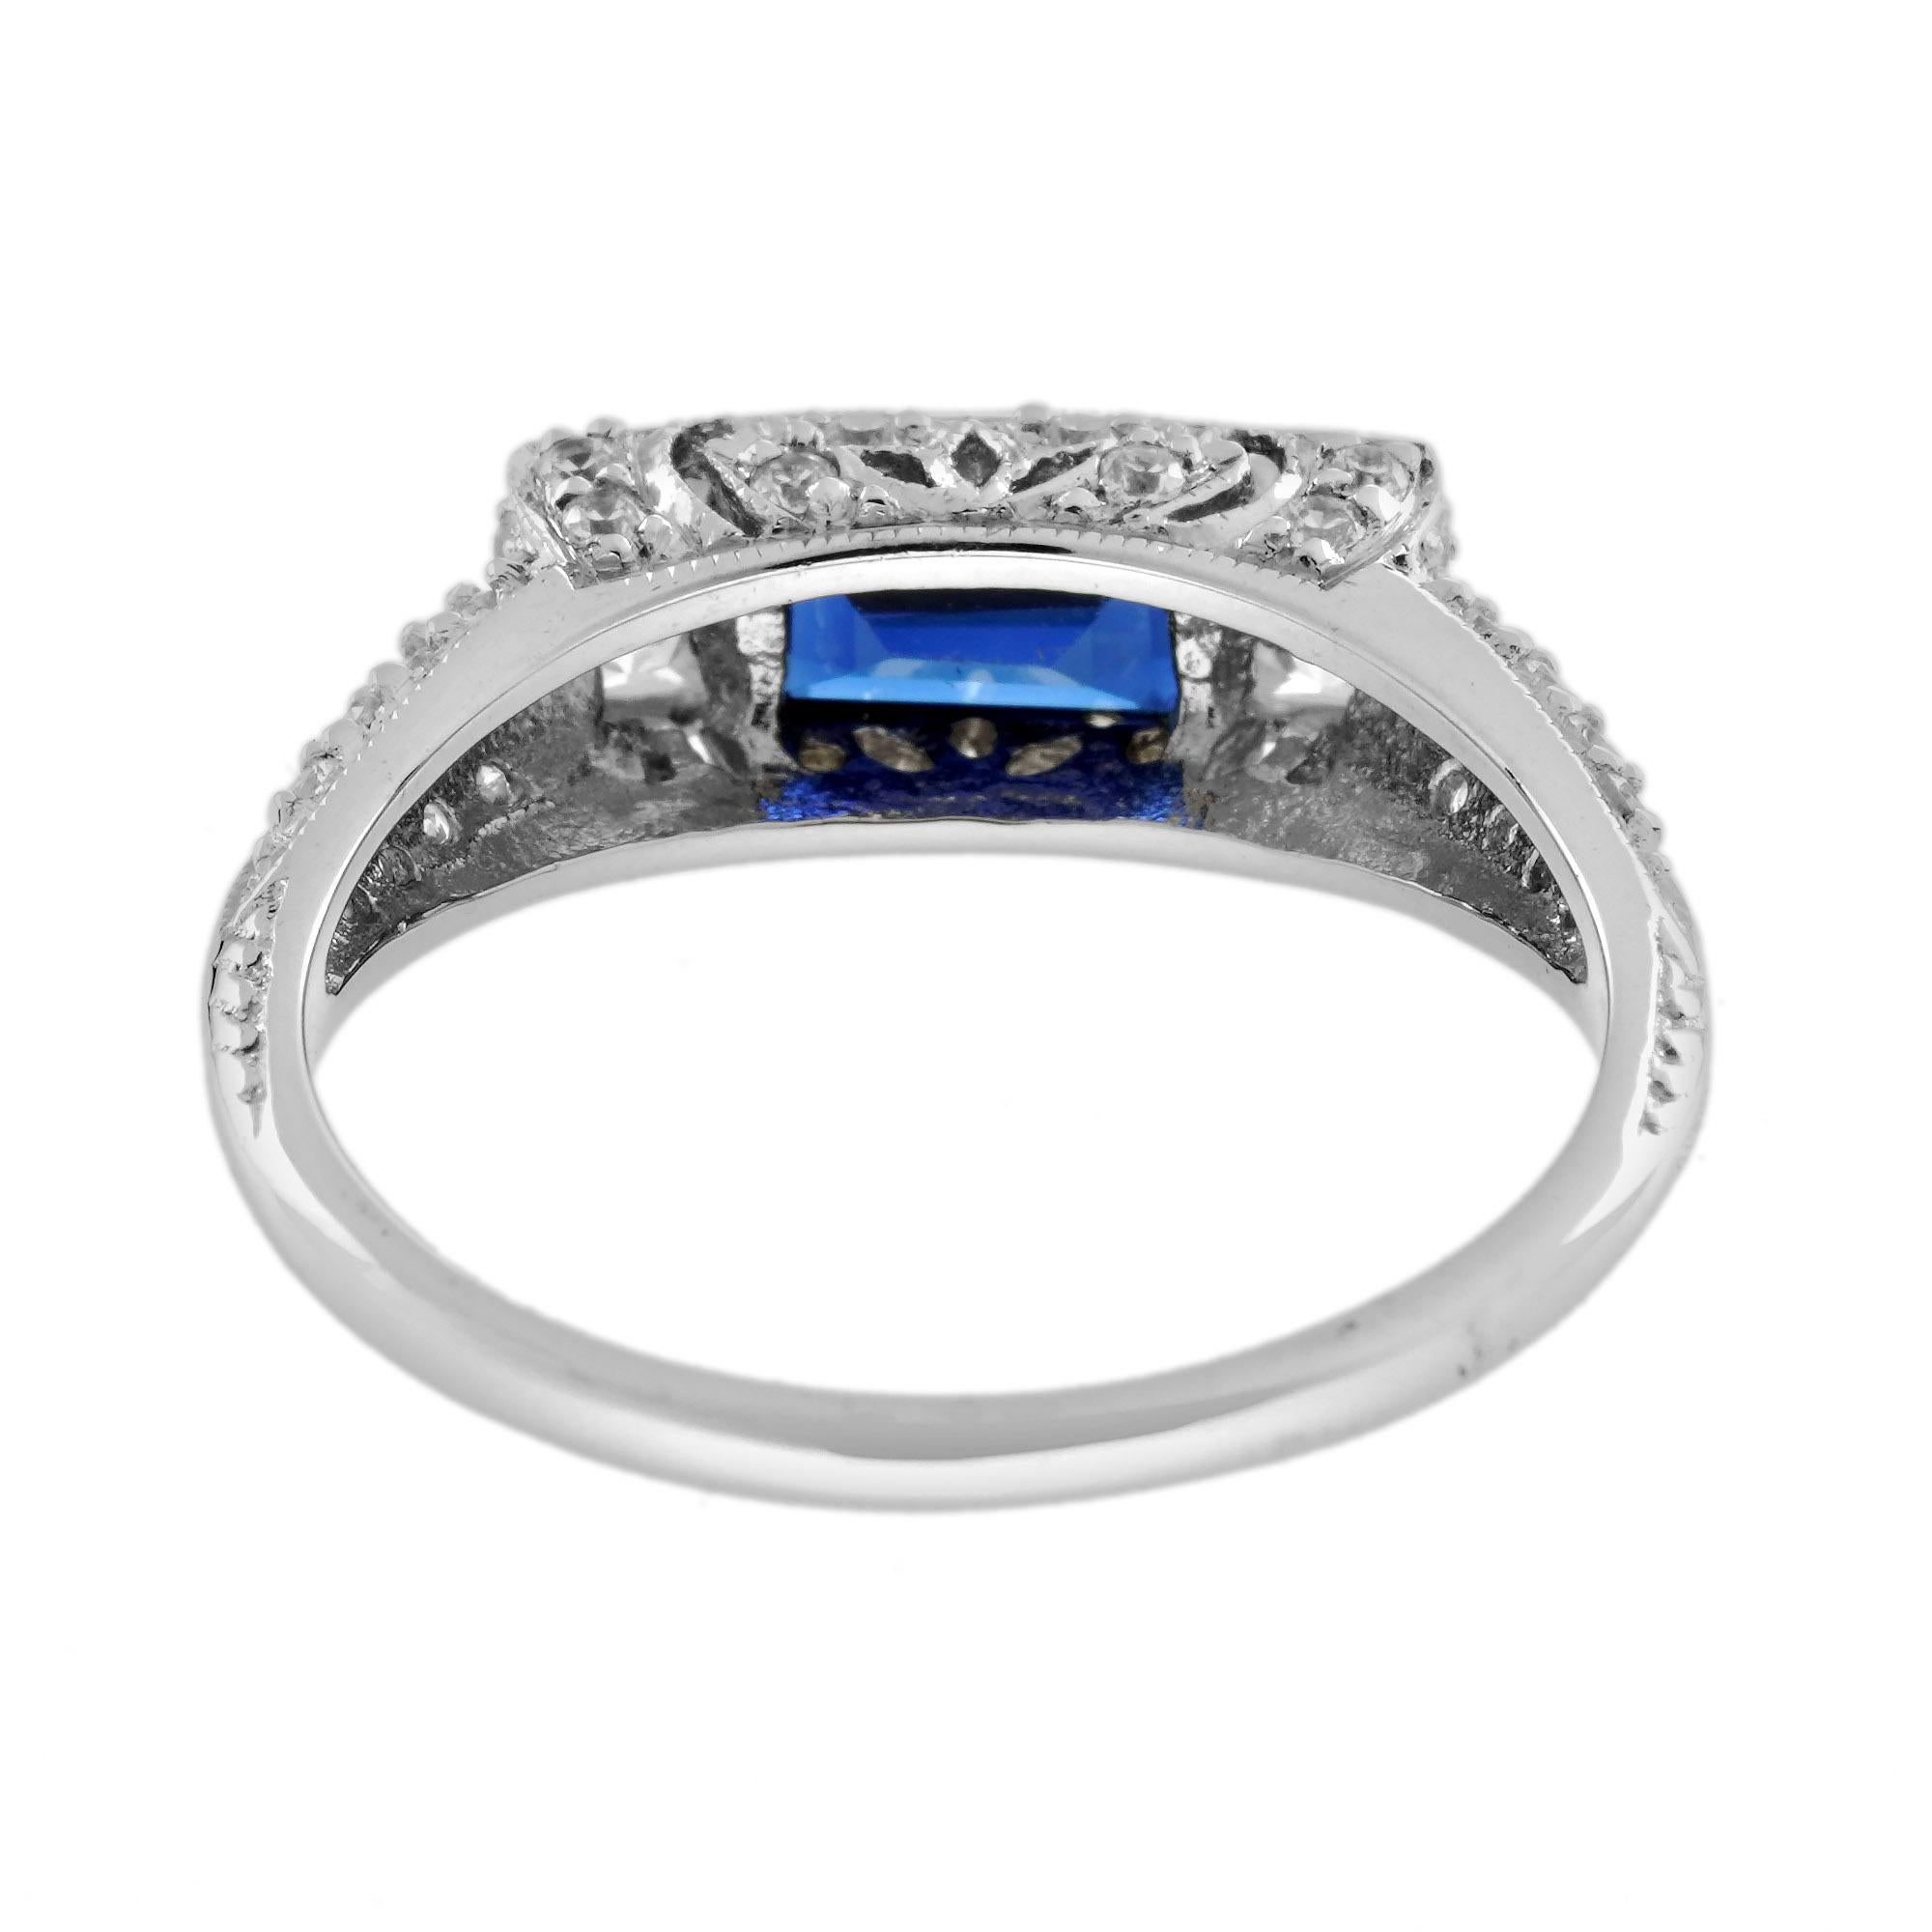 For Sale:  Blue Sapphire and Diamond Art Deco Style Solitaire Ring in 14K White Gold  5